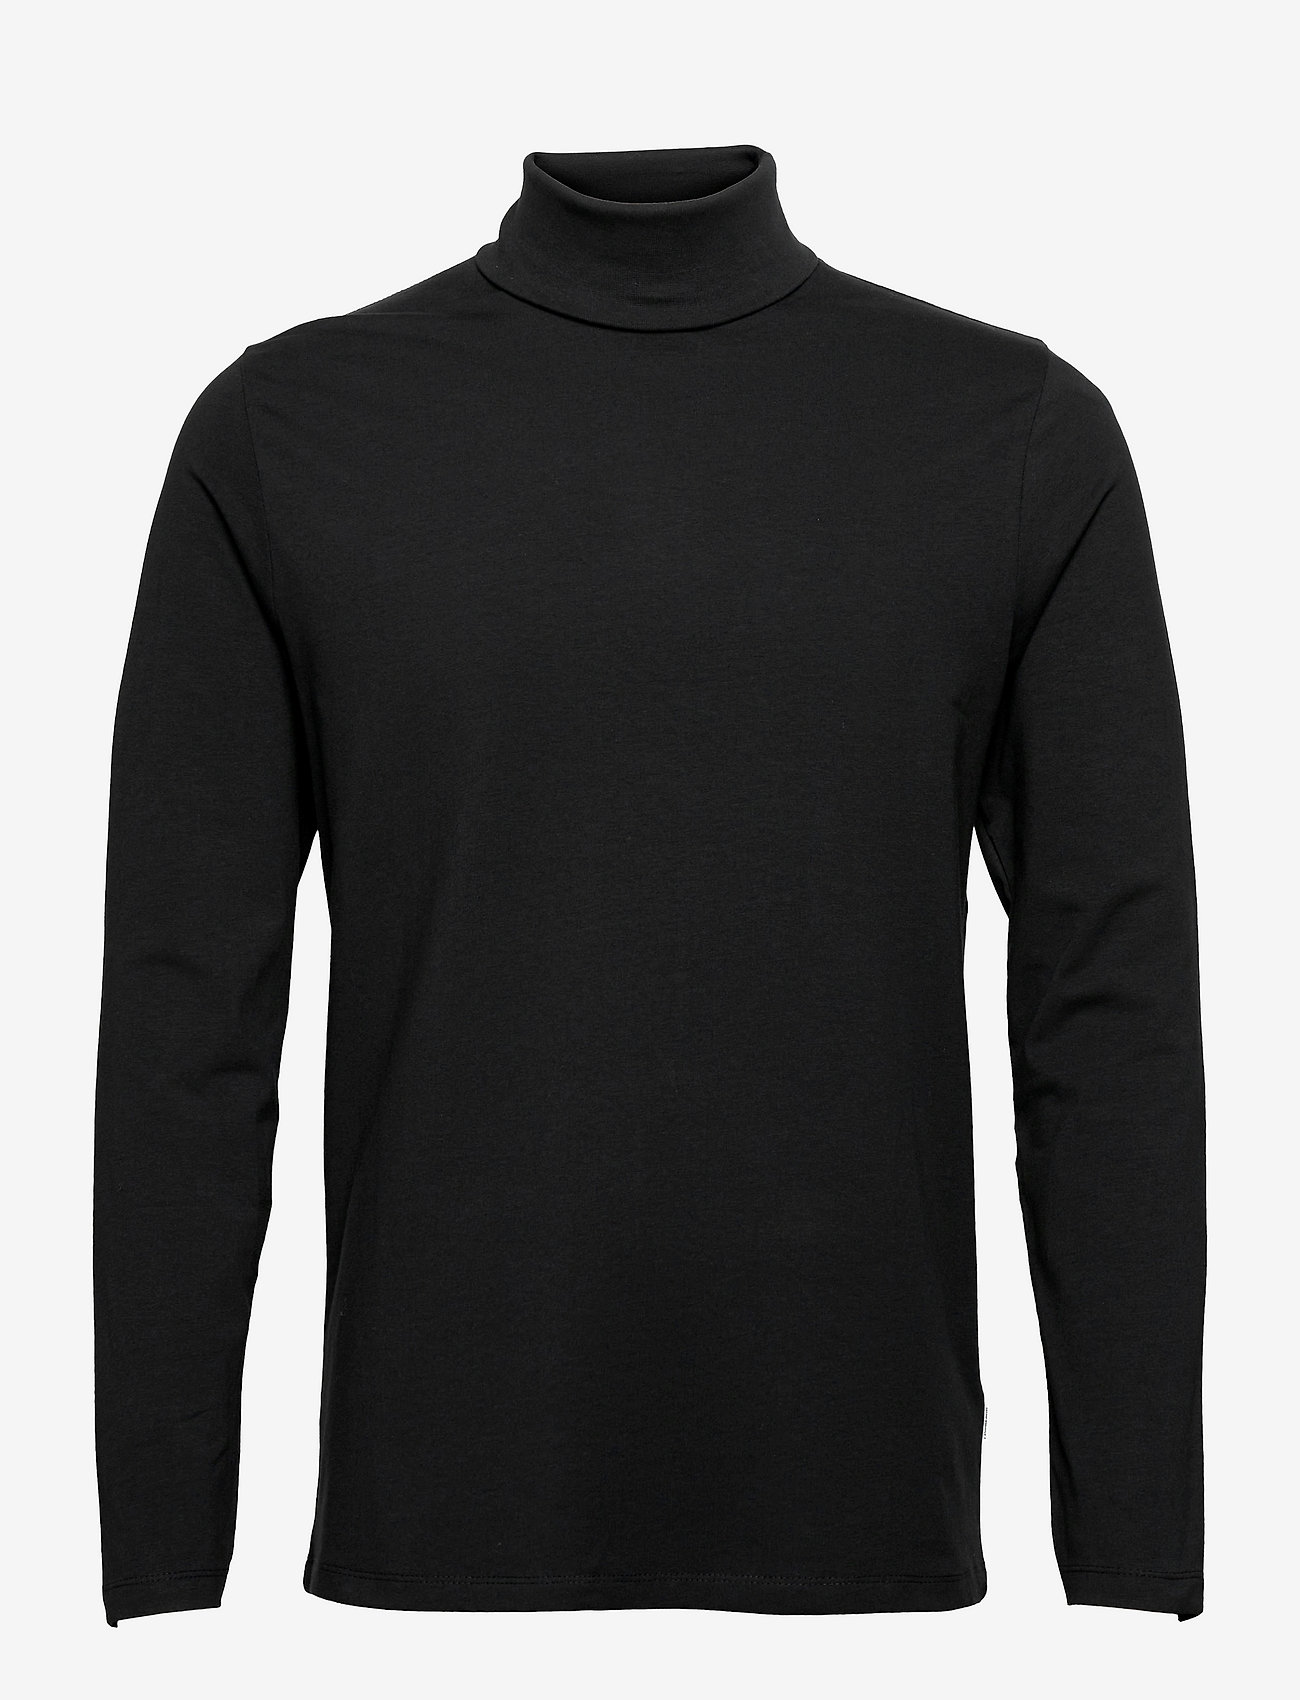 Lindbergh - Roll neck tee L/S - nordic style - black - 1